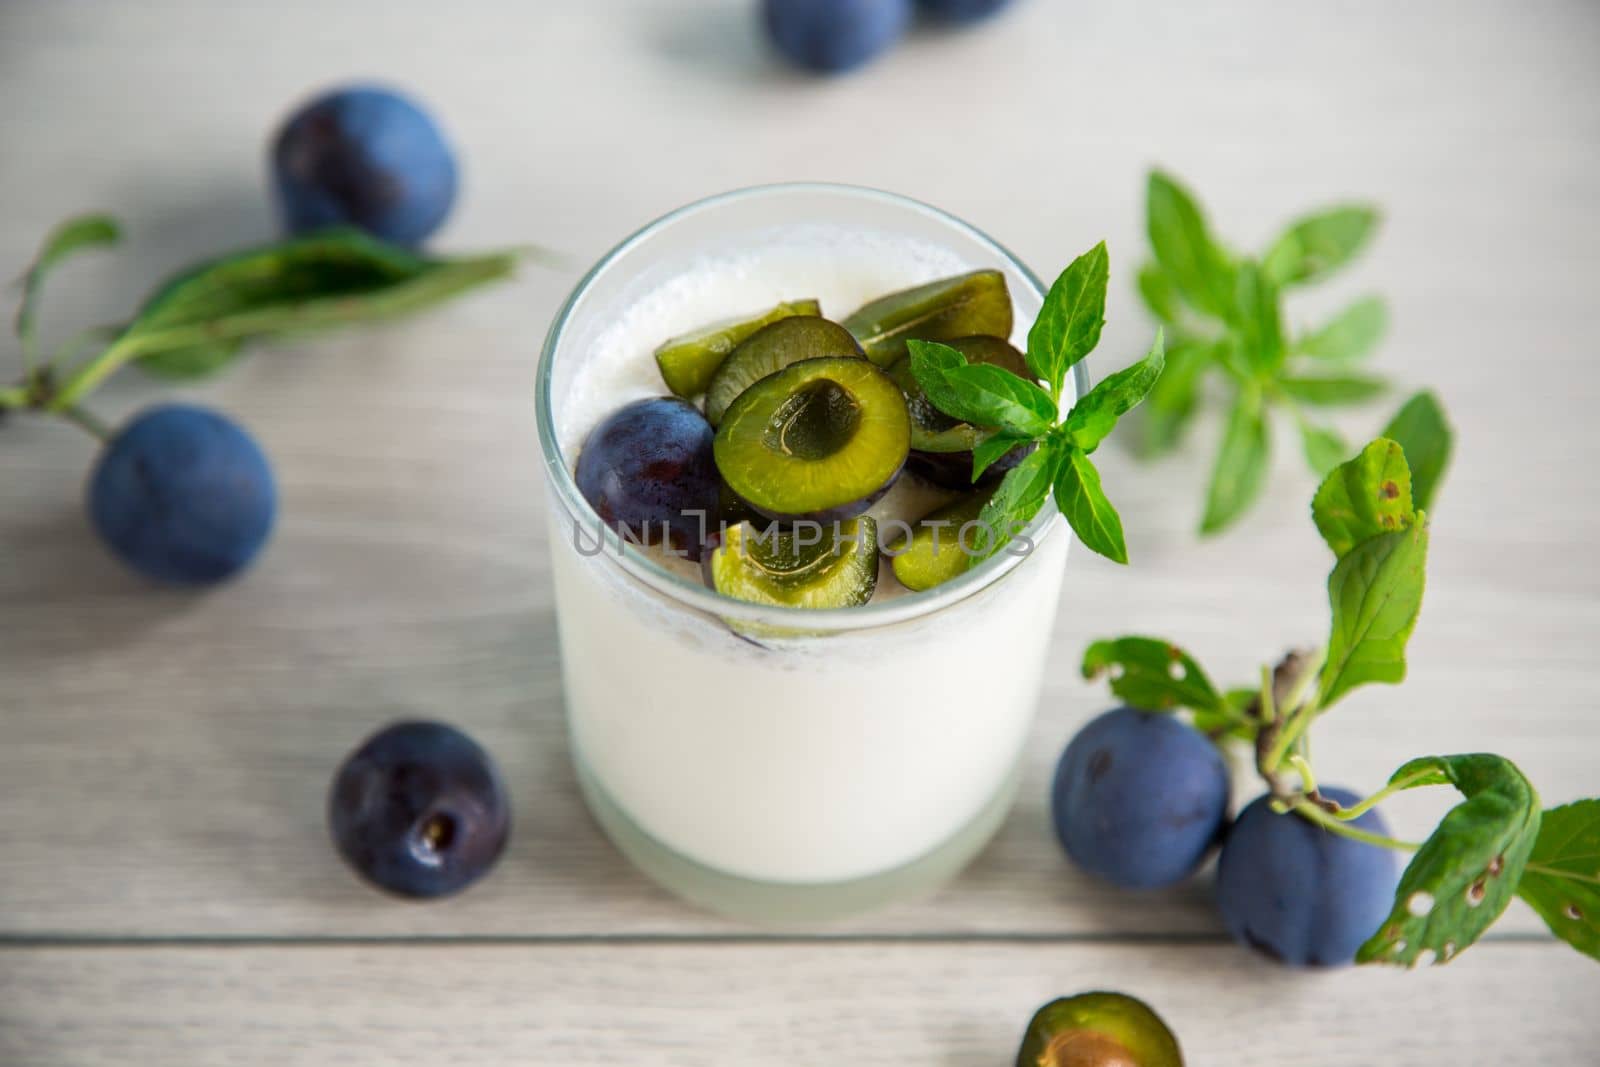 sweet homemade yogurt with fresh plum slices in a glass on a wooden table